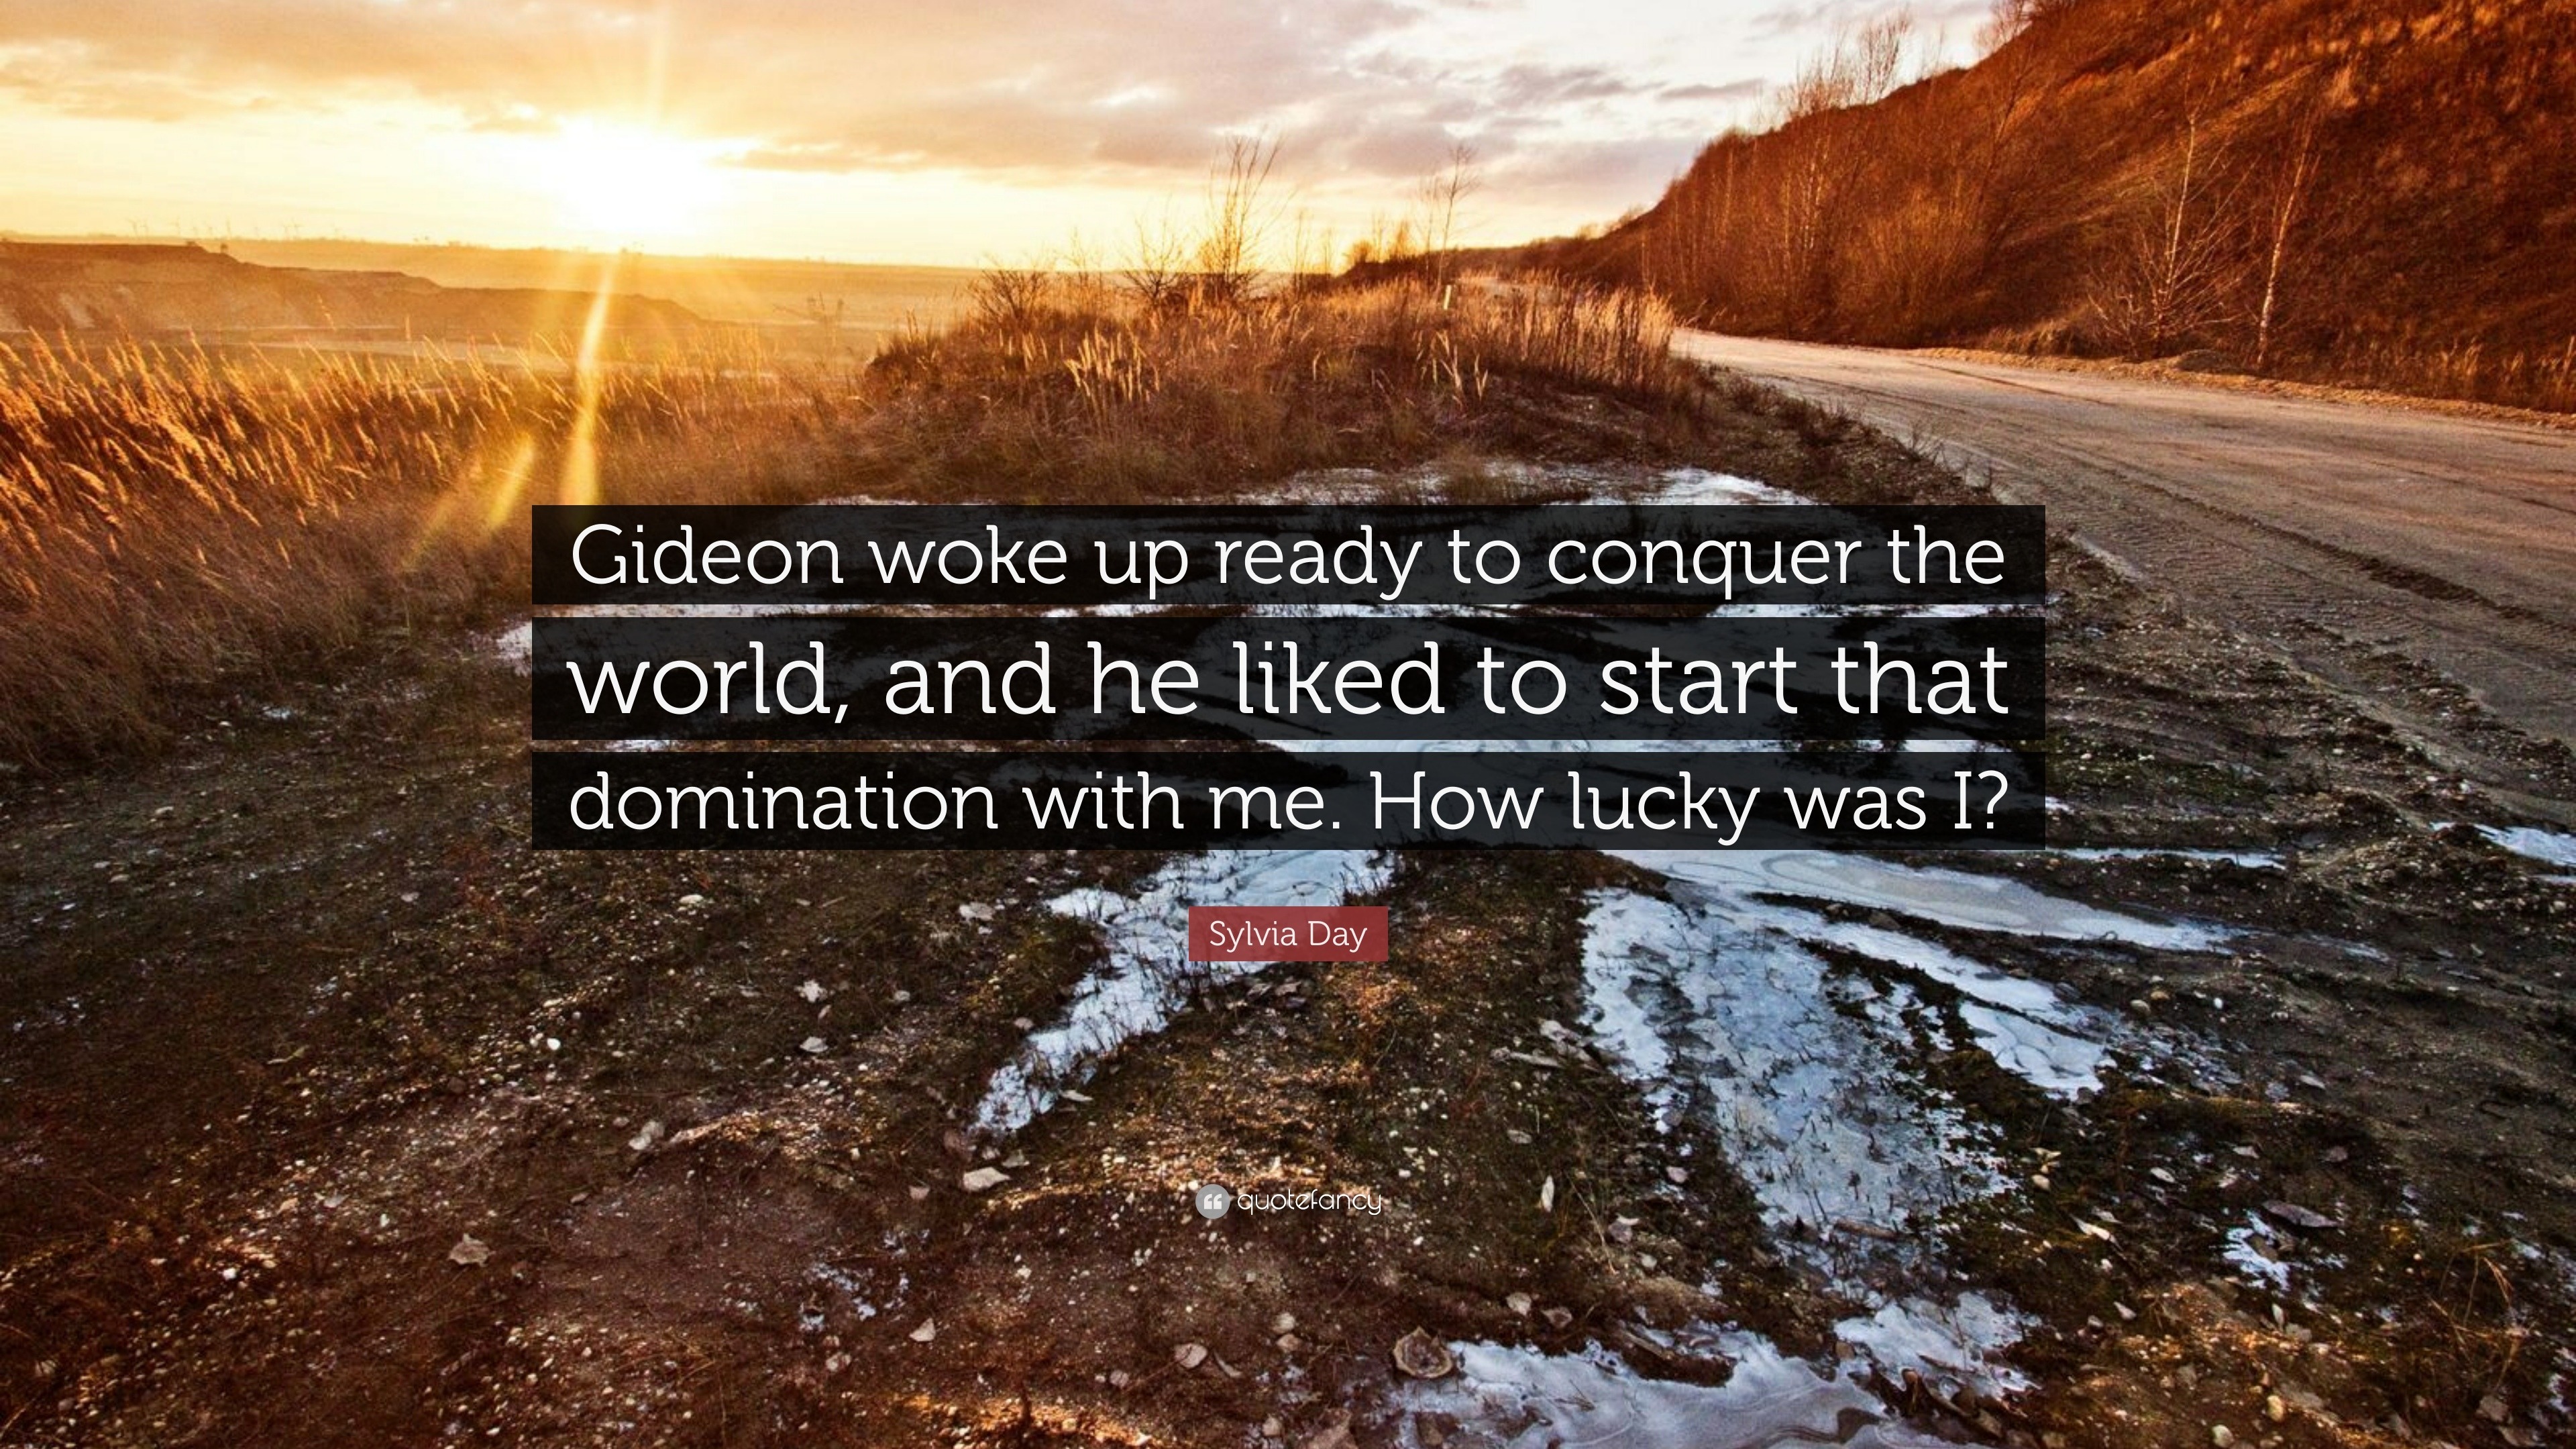 Sylvia Day Quote Gideon Woke Up Ready To Conquer The World And He Liked To Start